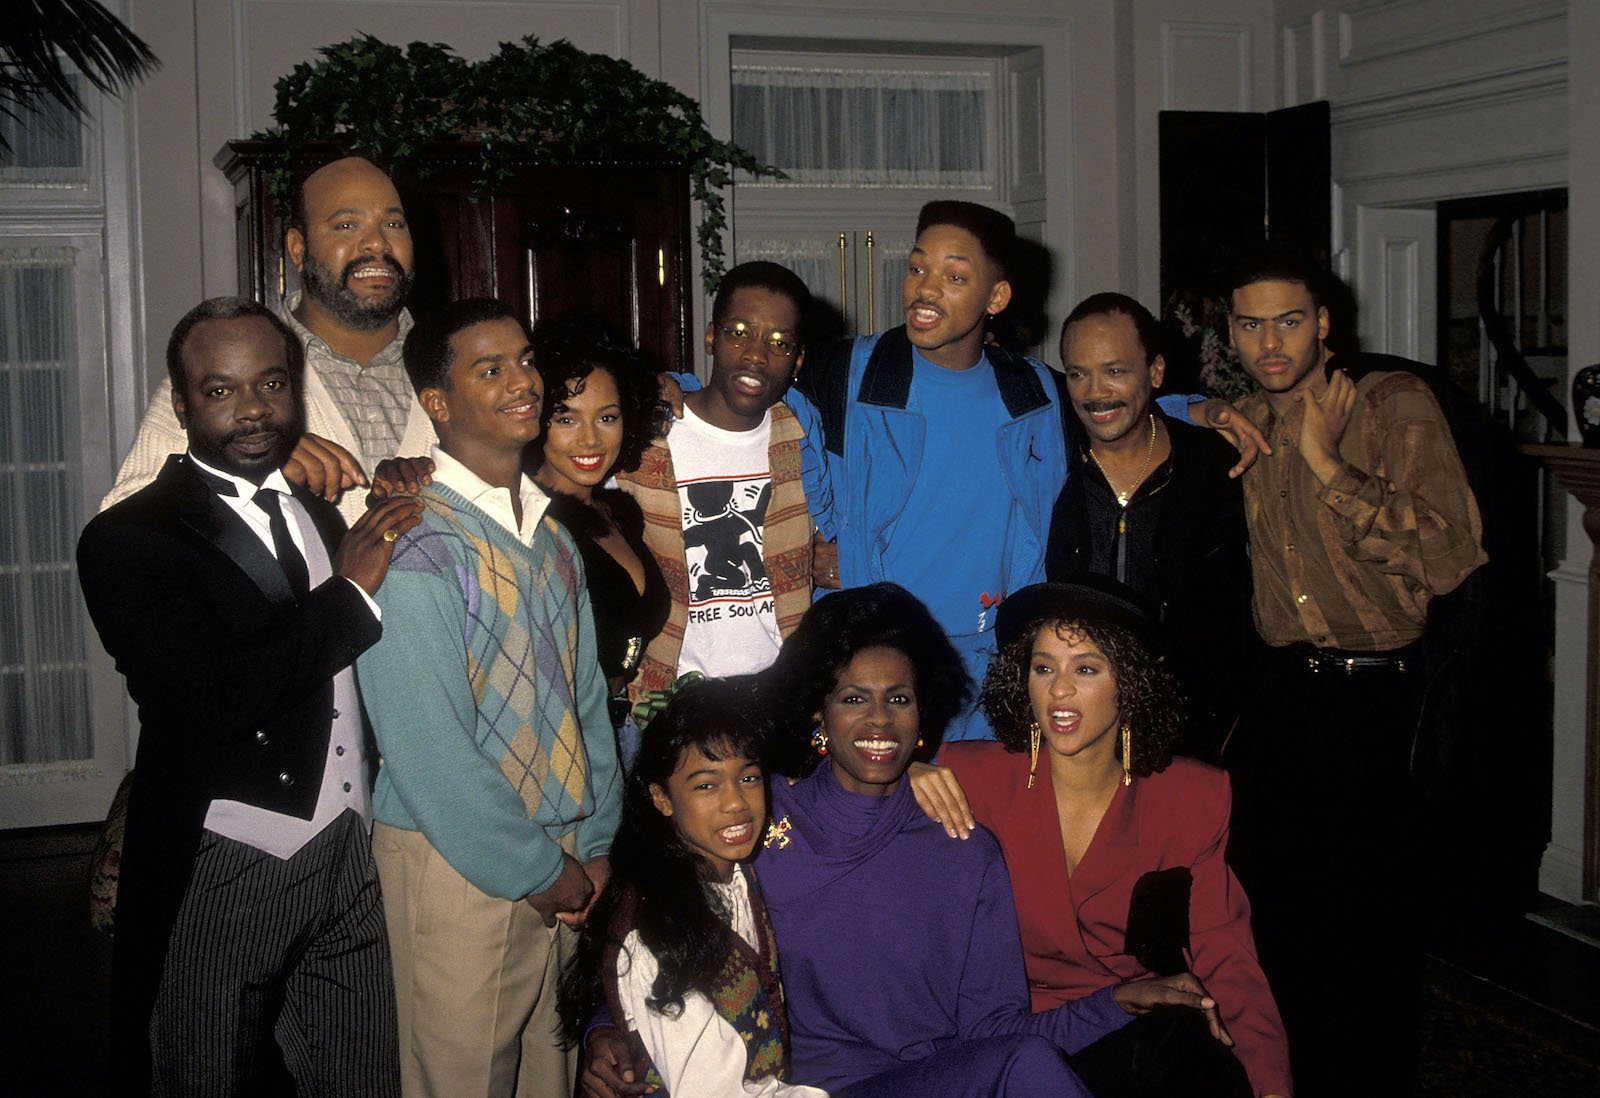 The cast of 'The Fresh Prince of Bel-Air' gathers for an impromptu photo